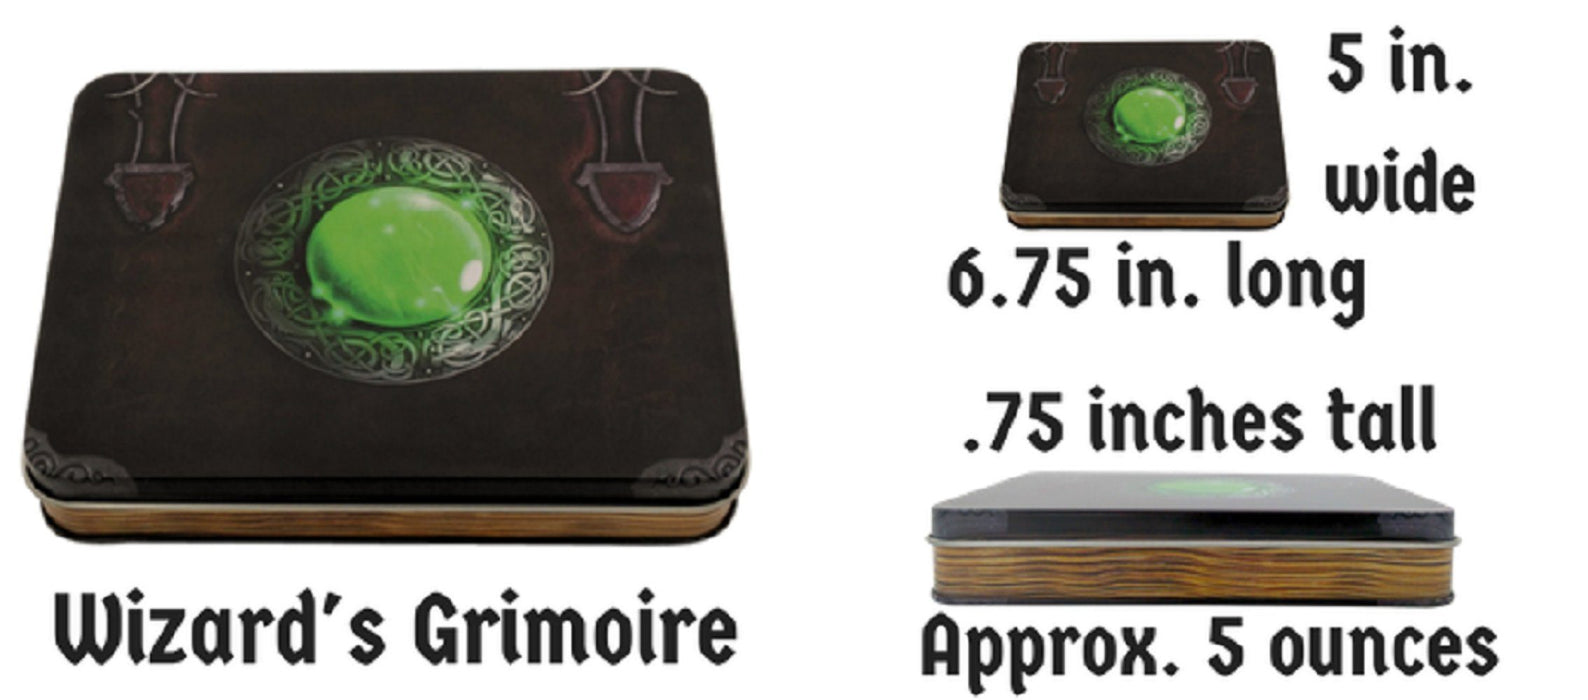 Metal Dice - Wizard's Grimoire With Umbral Fae | Shiny Black Nickel Finish With Pink Numbering Metal Dice Set